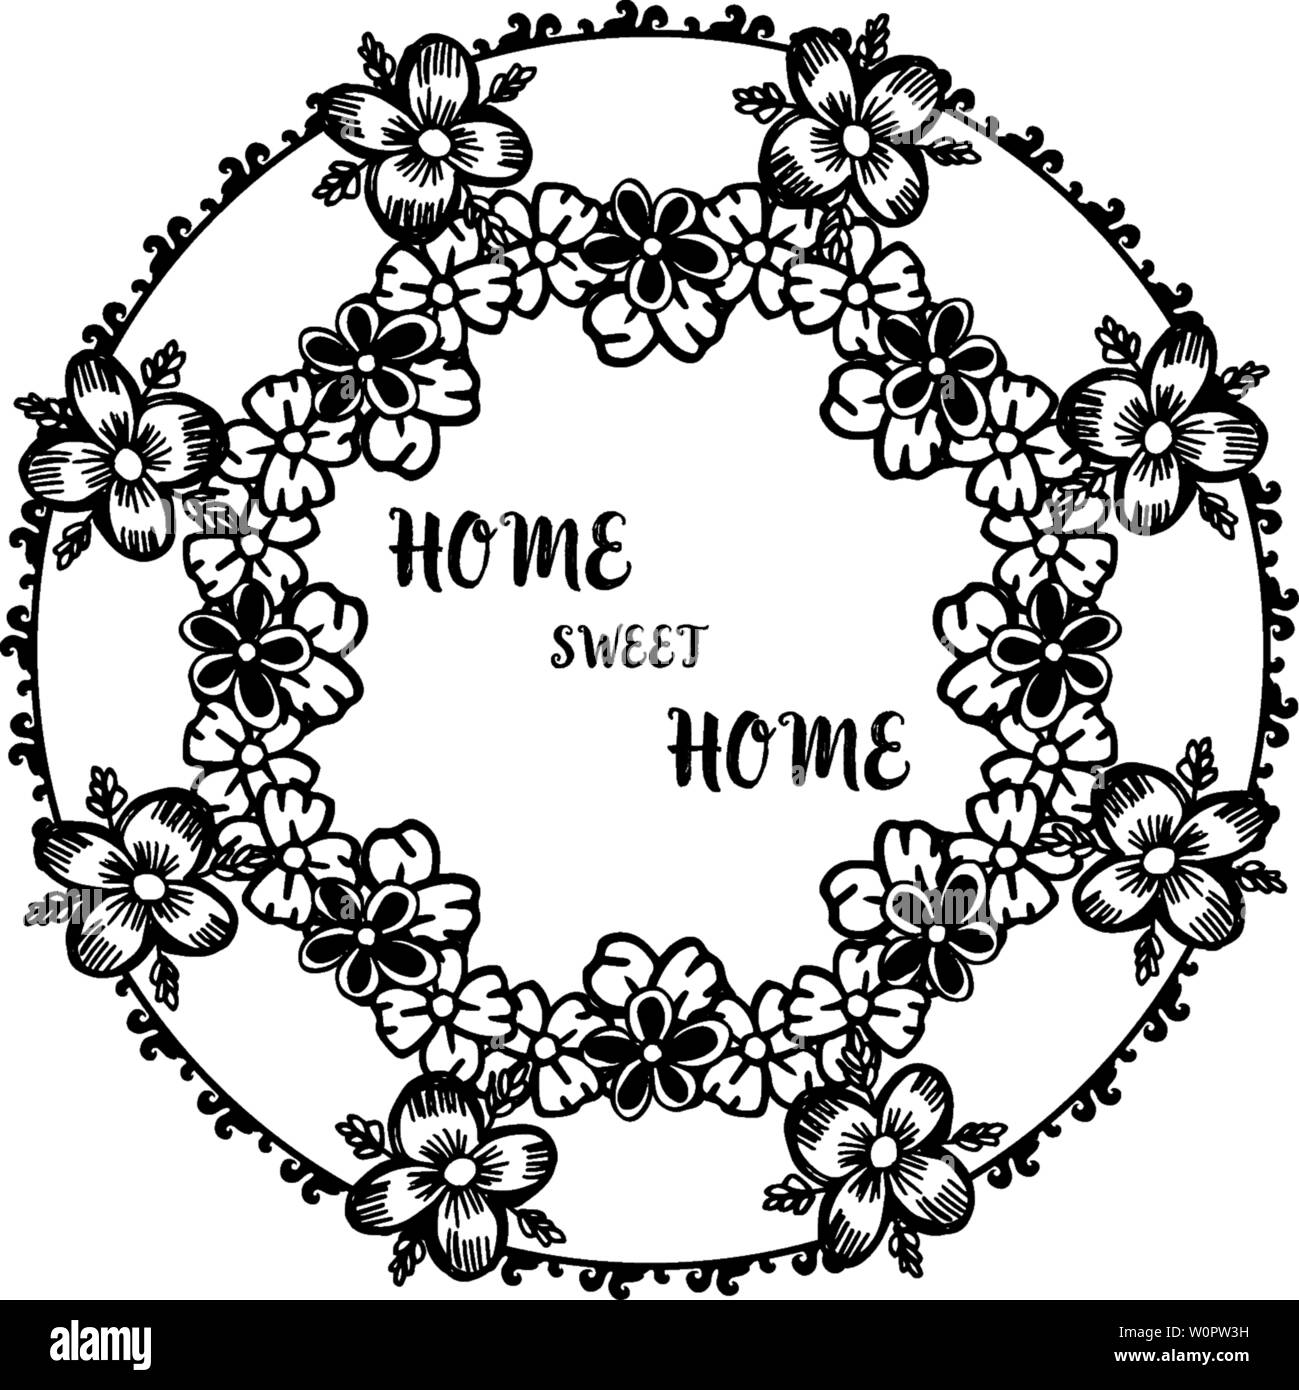 Vector illustration invitation card of home sweet home with cute wreath ...